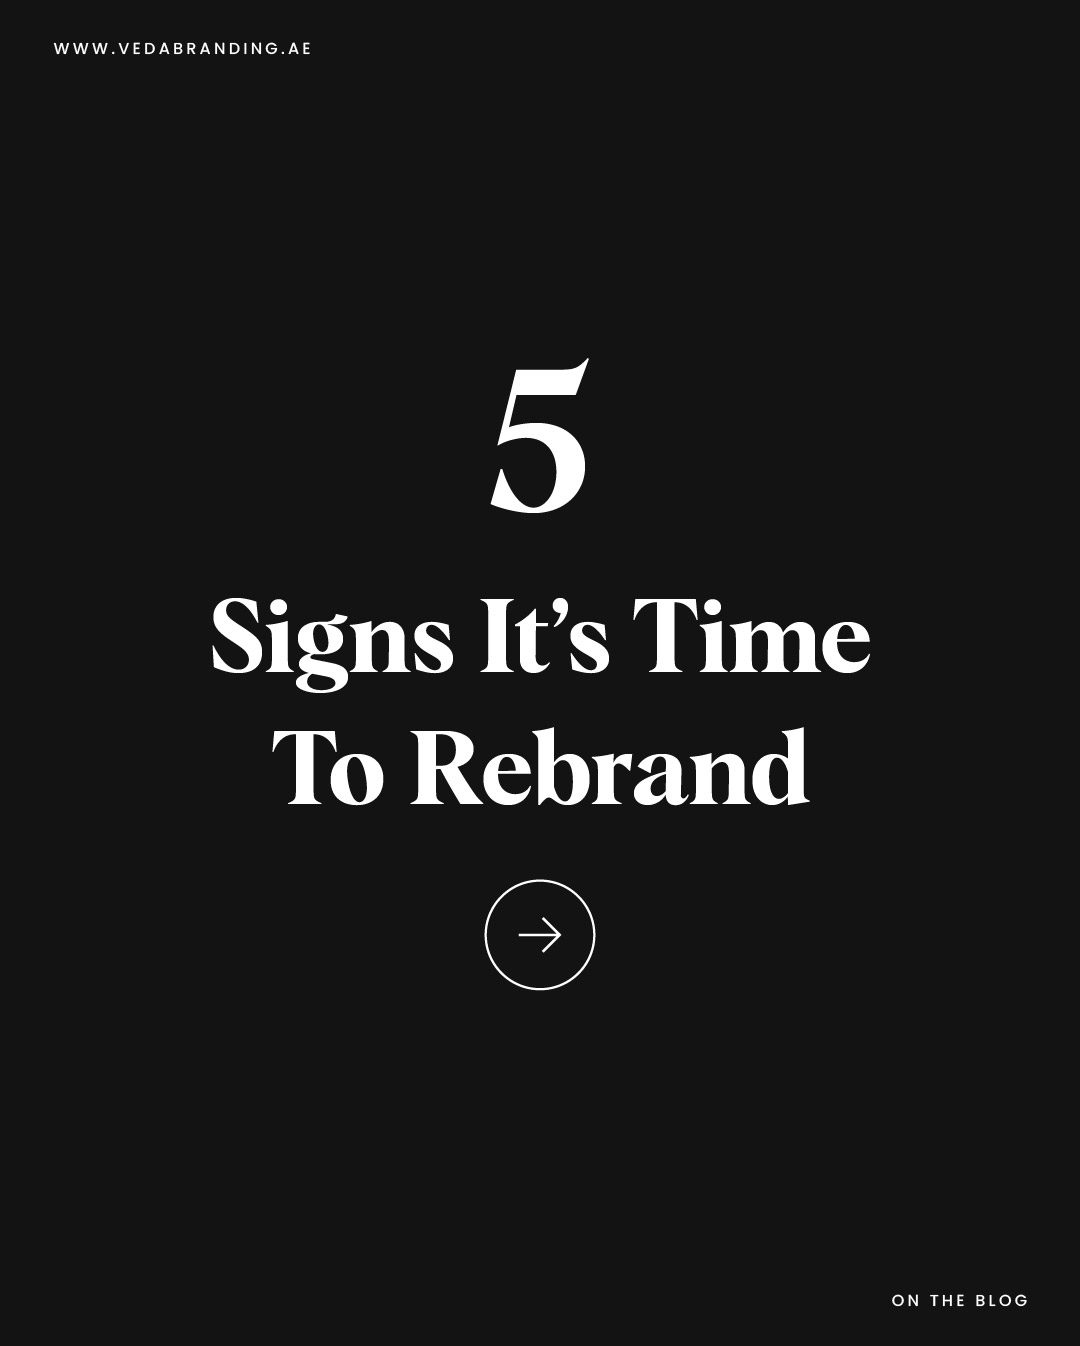 5 Signs it's time to rebrand your business